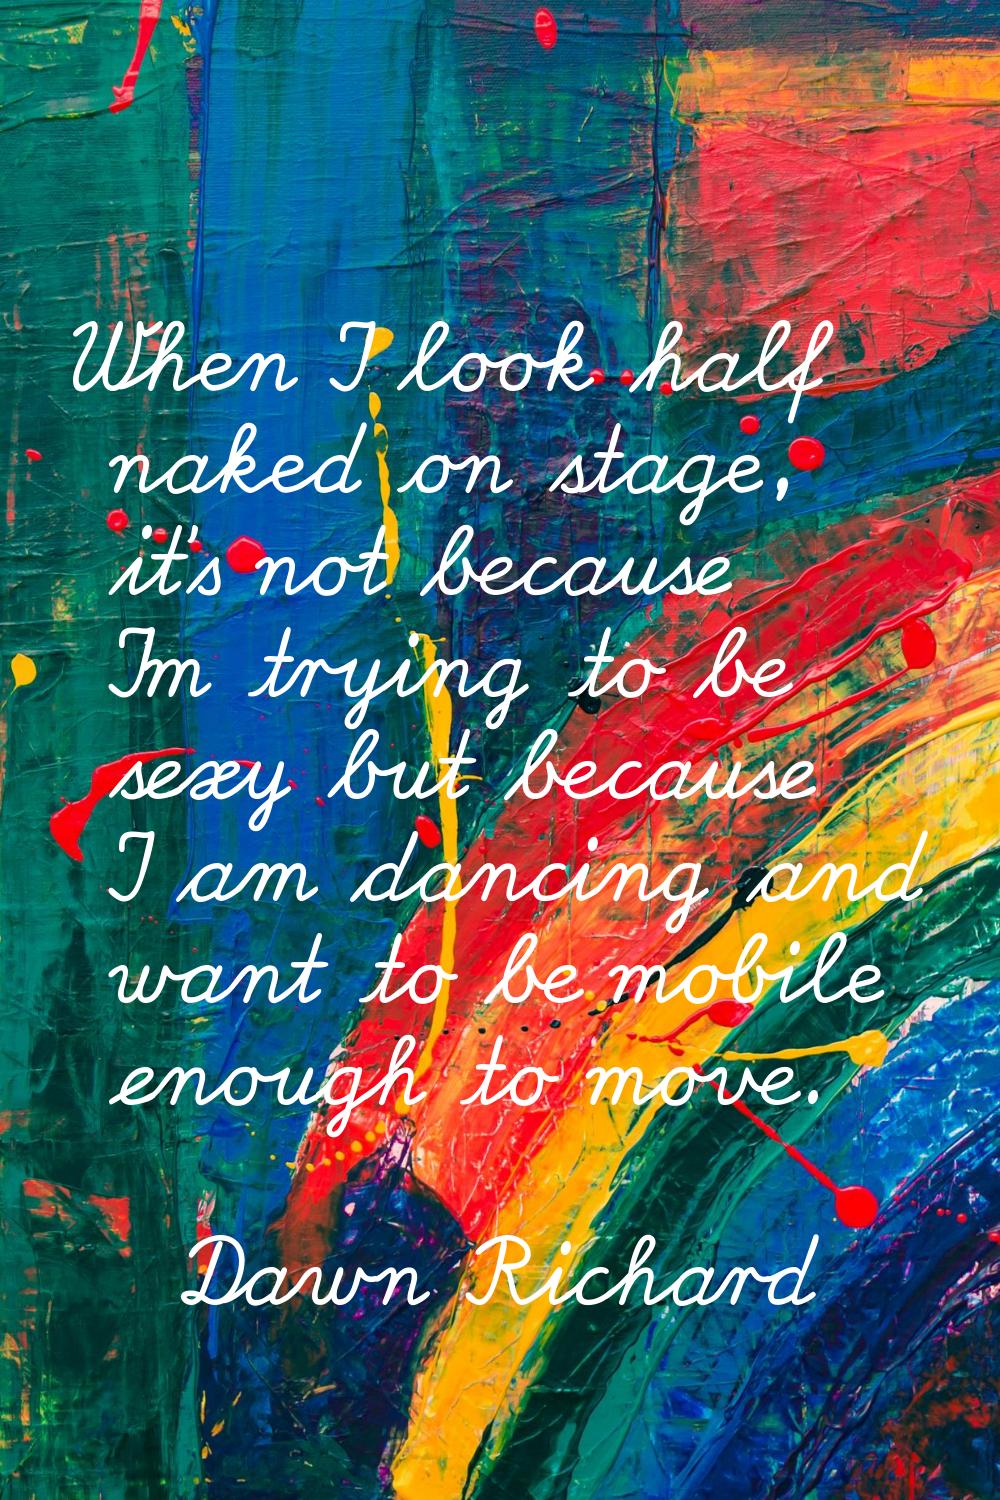 When I look half naked on stage, it's not because I'm trying to be sexy but because I am dancing an